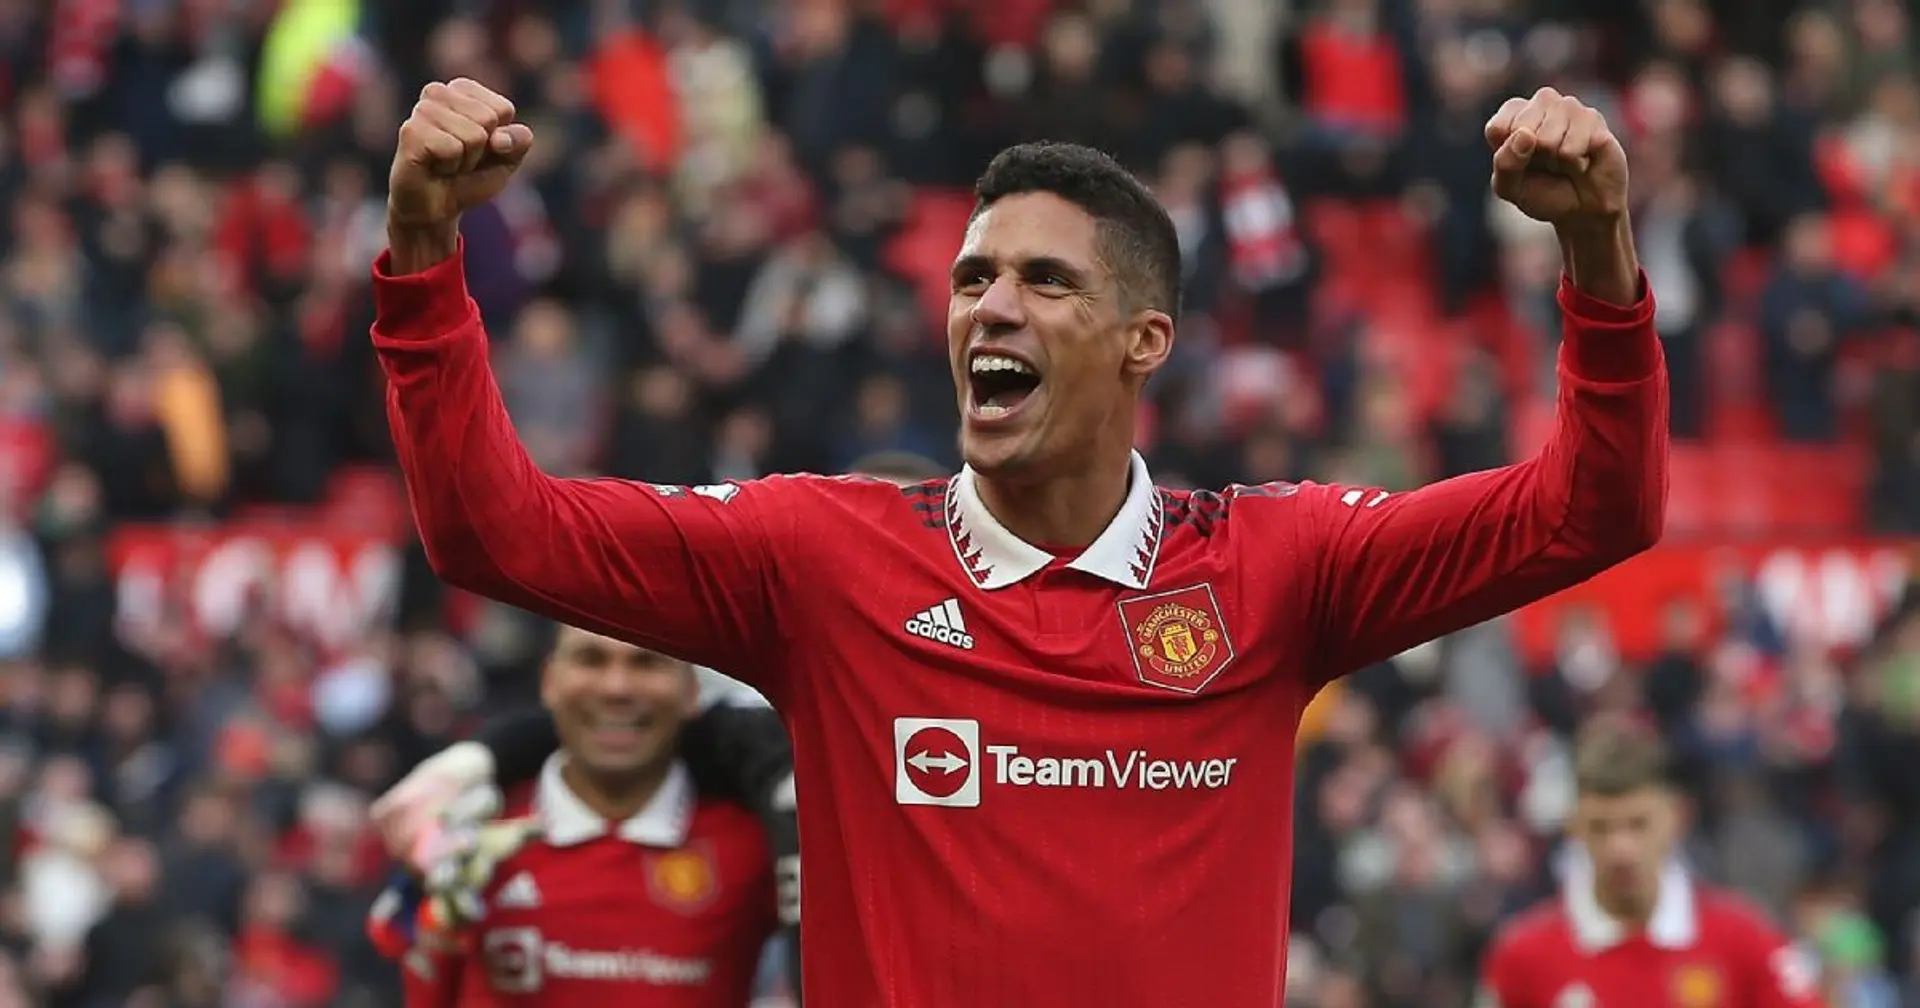 'Yeah, definitely': Varane says he would love to watch a United game with the fans